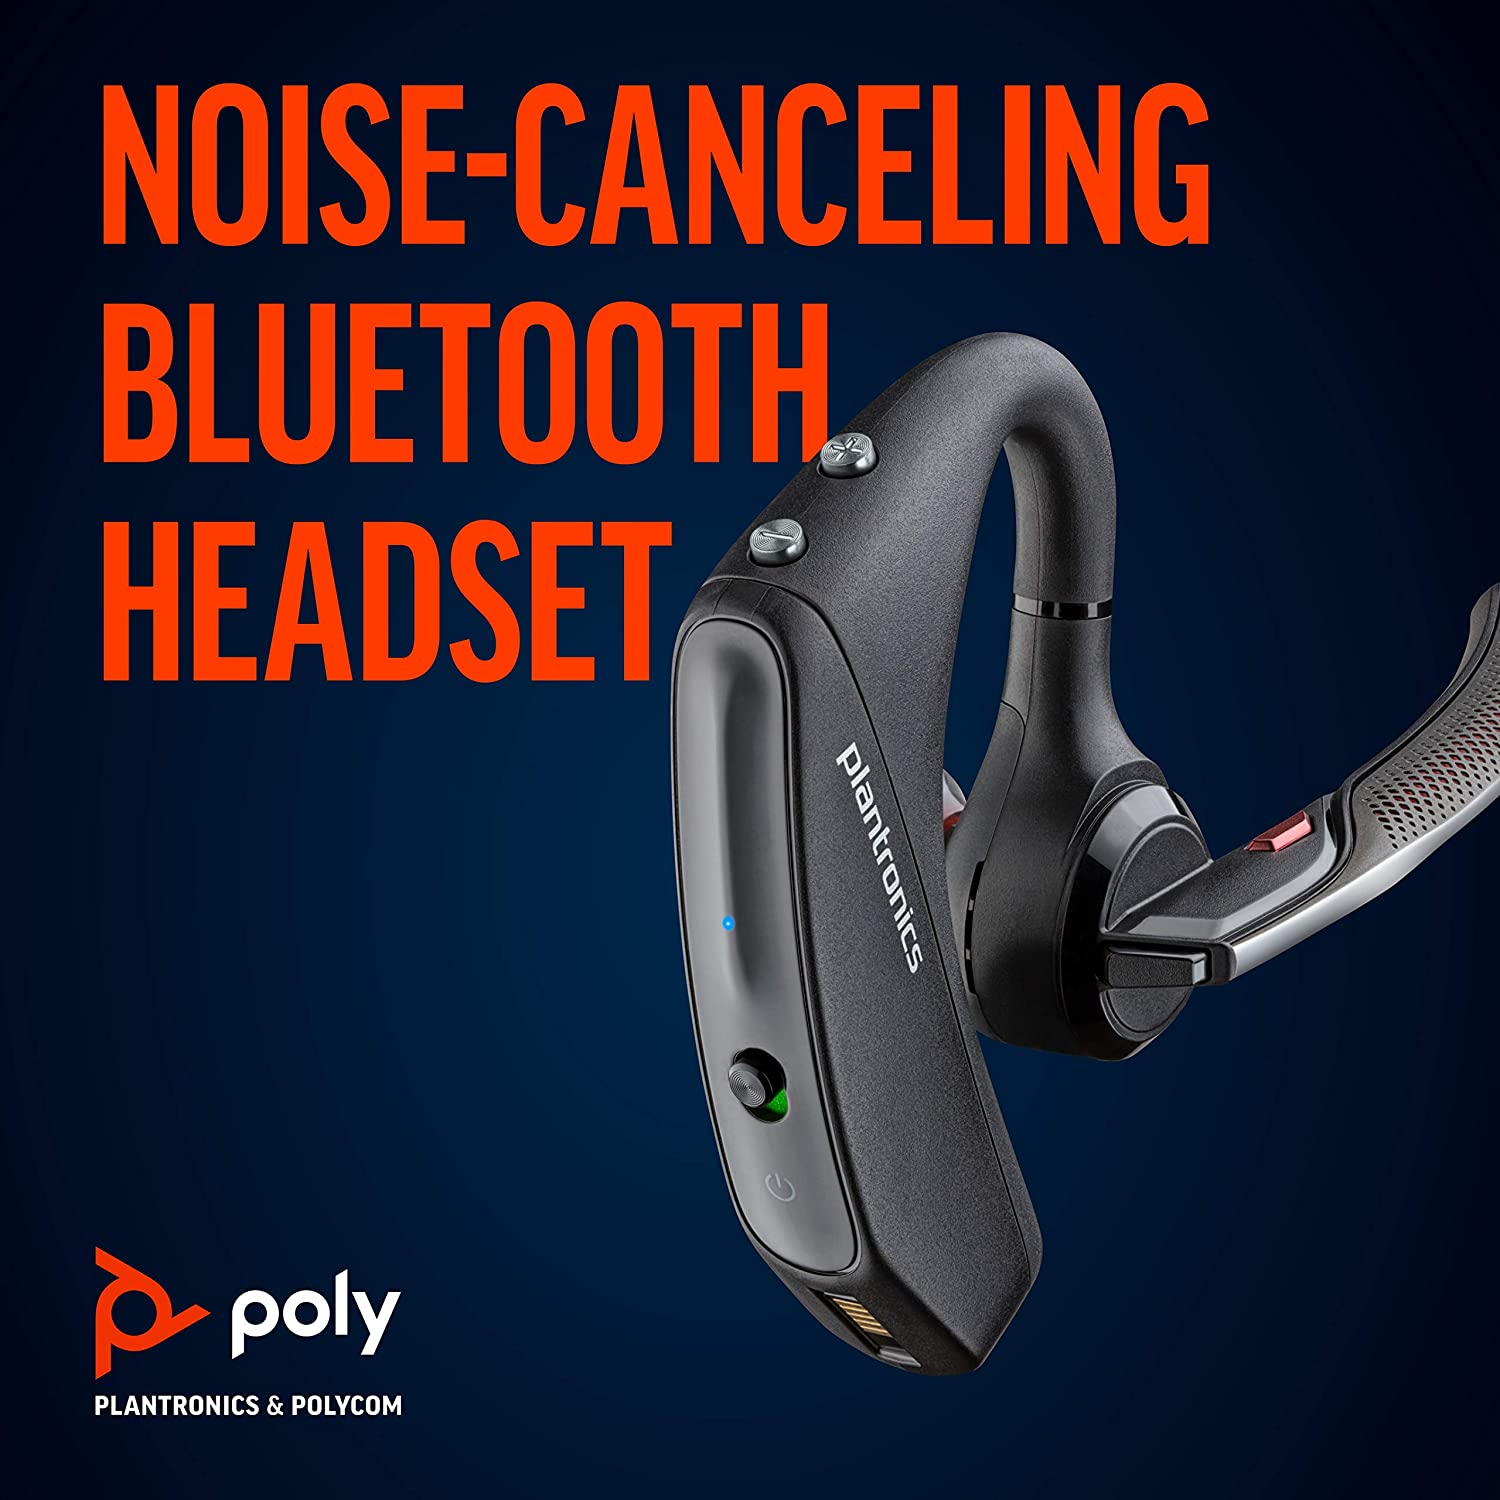 Plantronics Voyager 5200 Bluetooth Headset For Mobile Workers - Headset Advisor